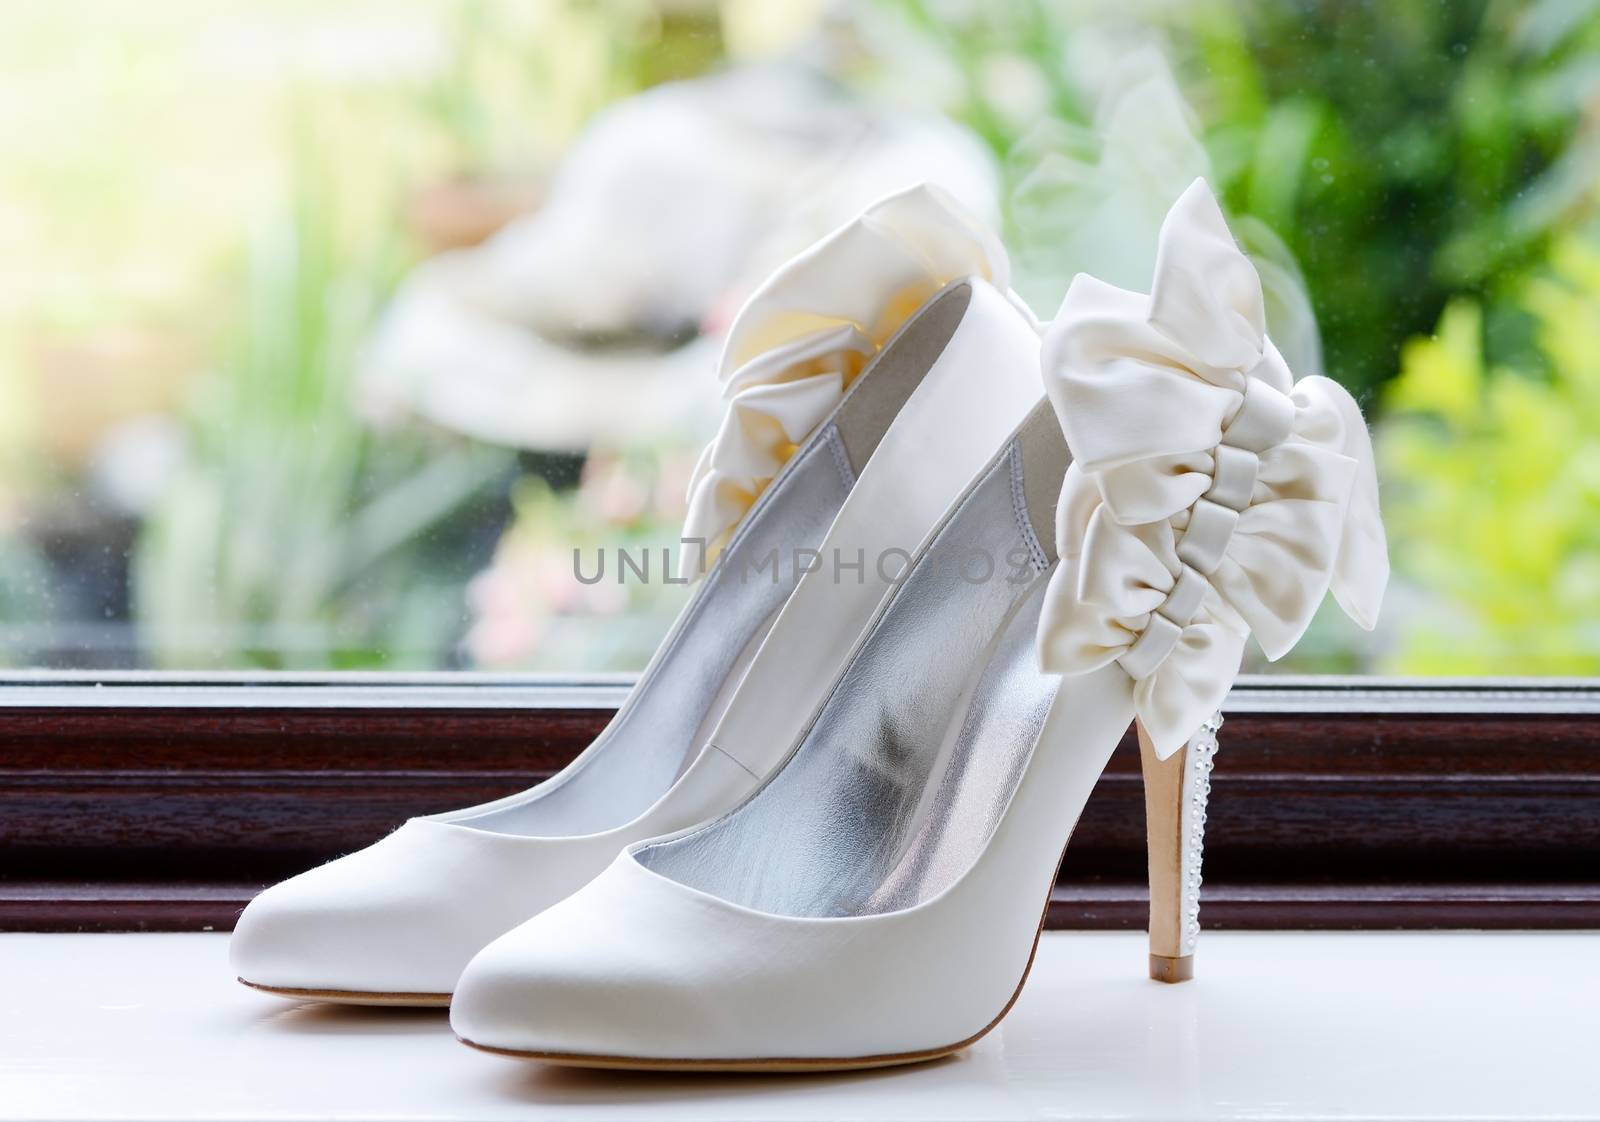 Brides shoes by kmwphotography